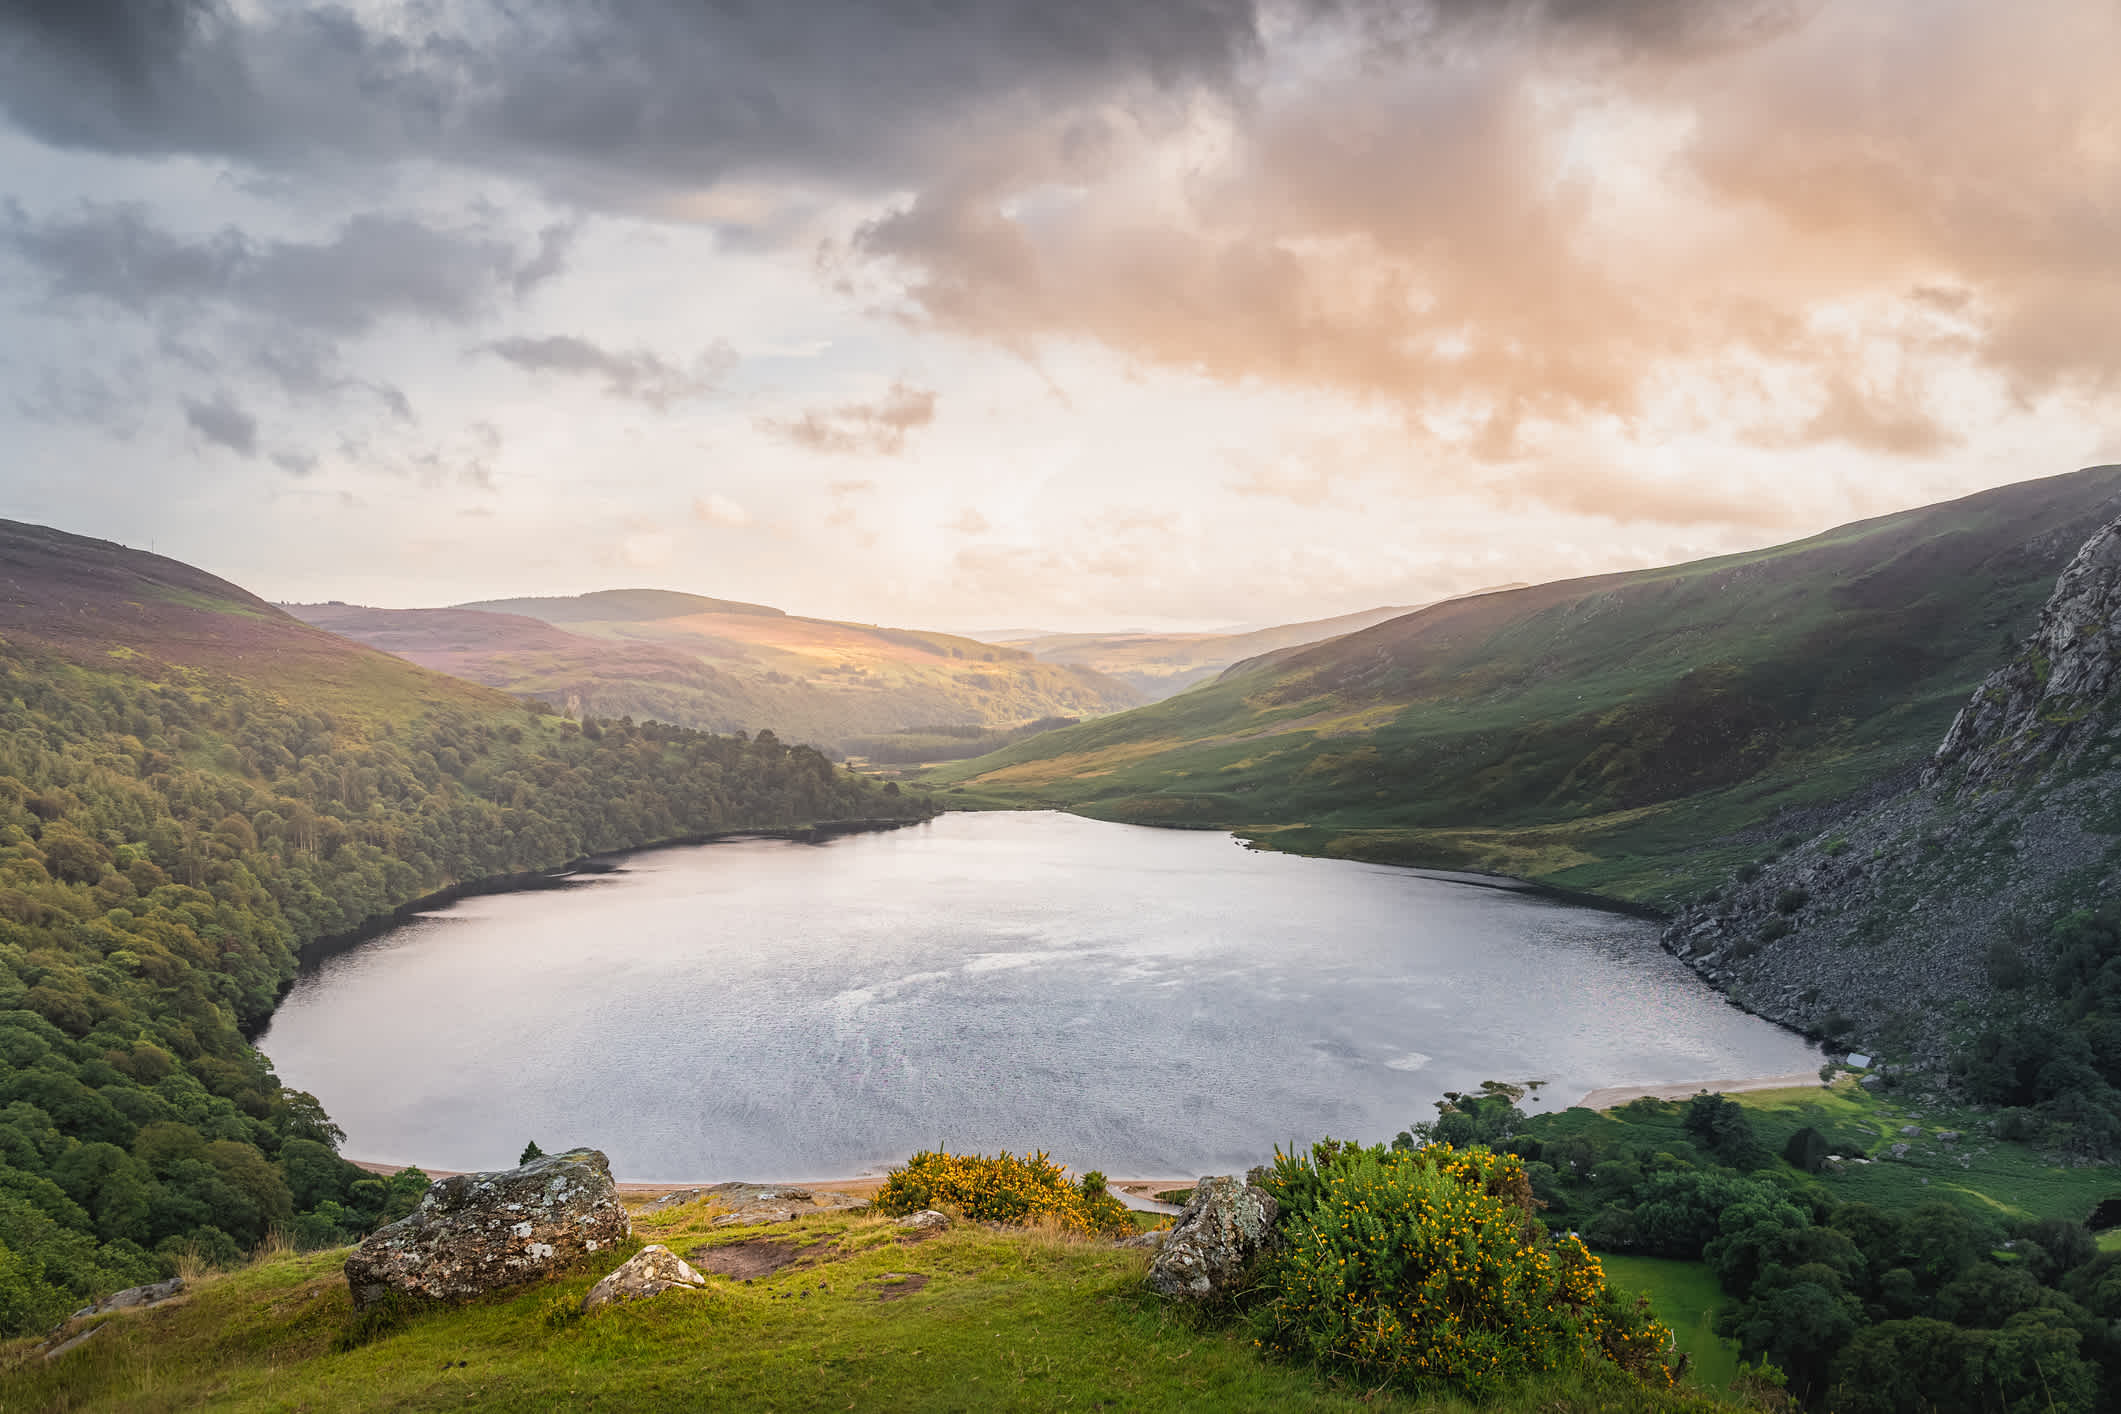 Sonnenuntergang am Lough Tay mit dem Guinness-See, Wicklow Mountains, Ireland. 